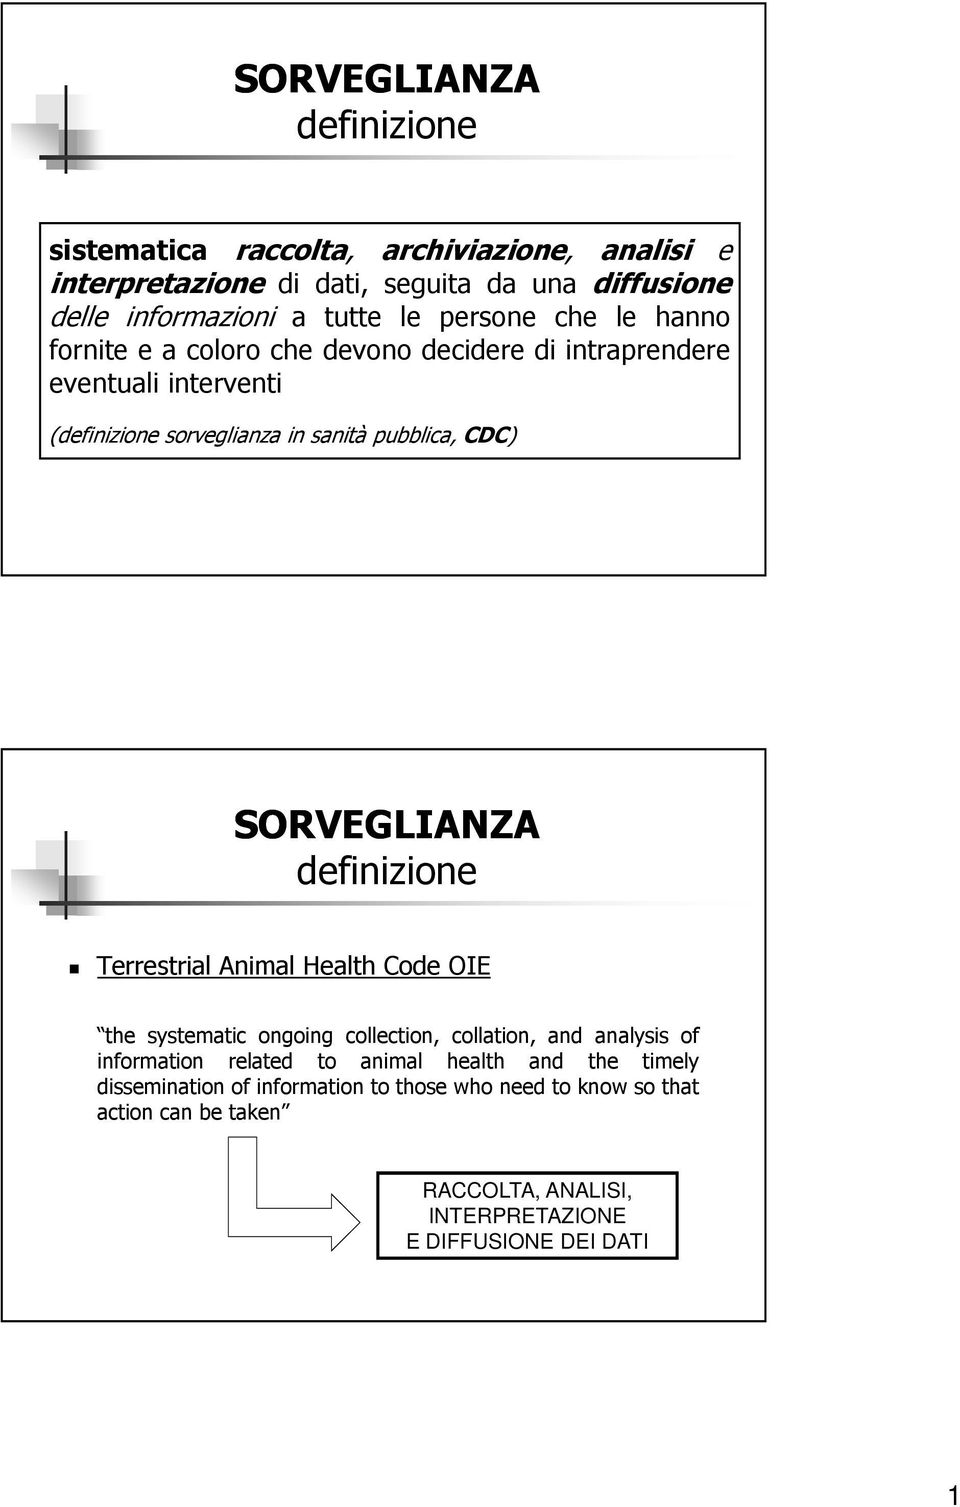 SORVEGLIANZA definizione Terrestrial Animal Health Code OIE the systematic ongoing collection, collation, and analysis of information related to animal